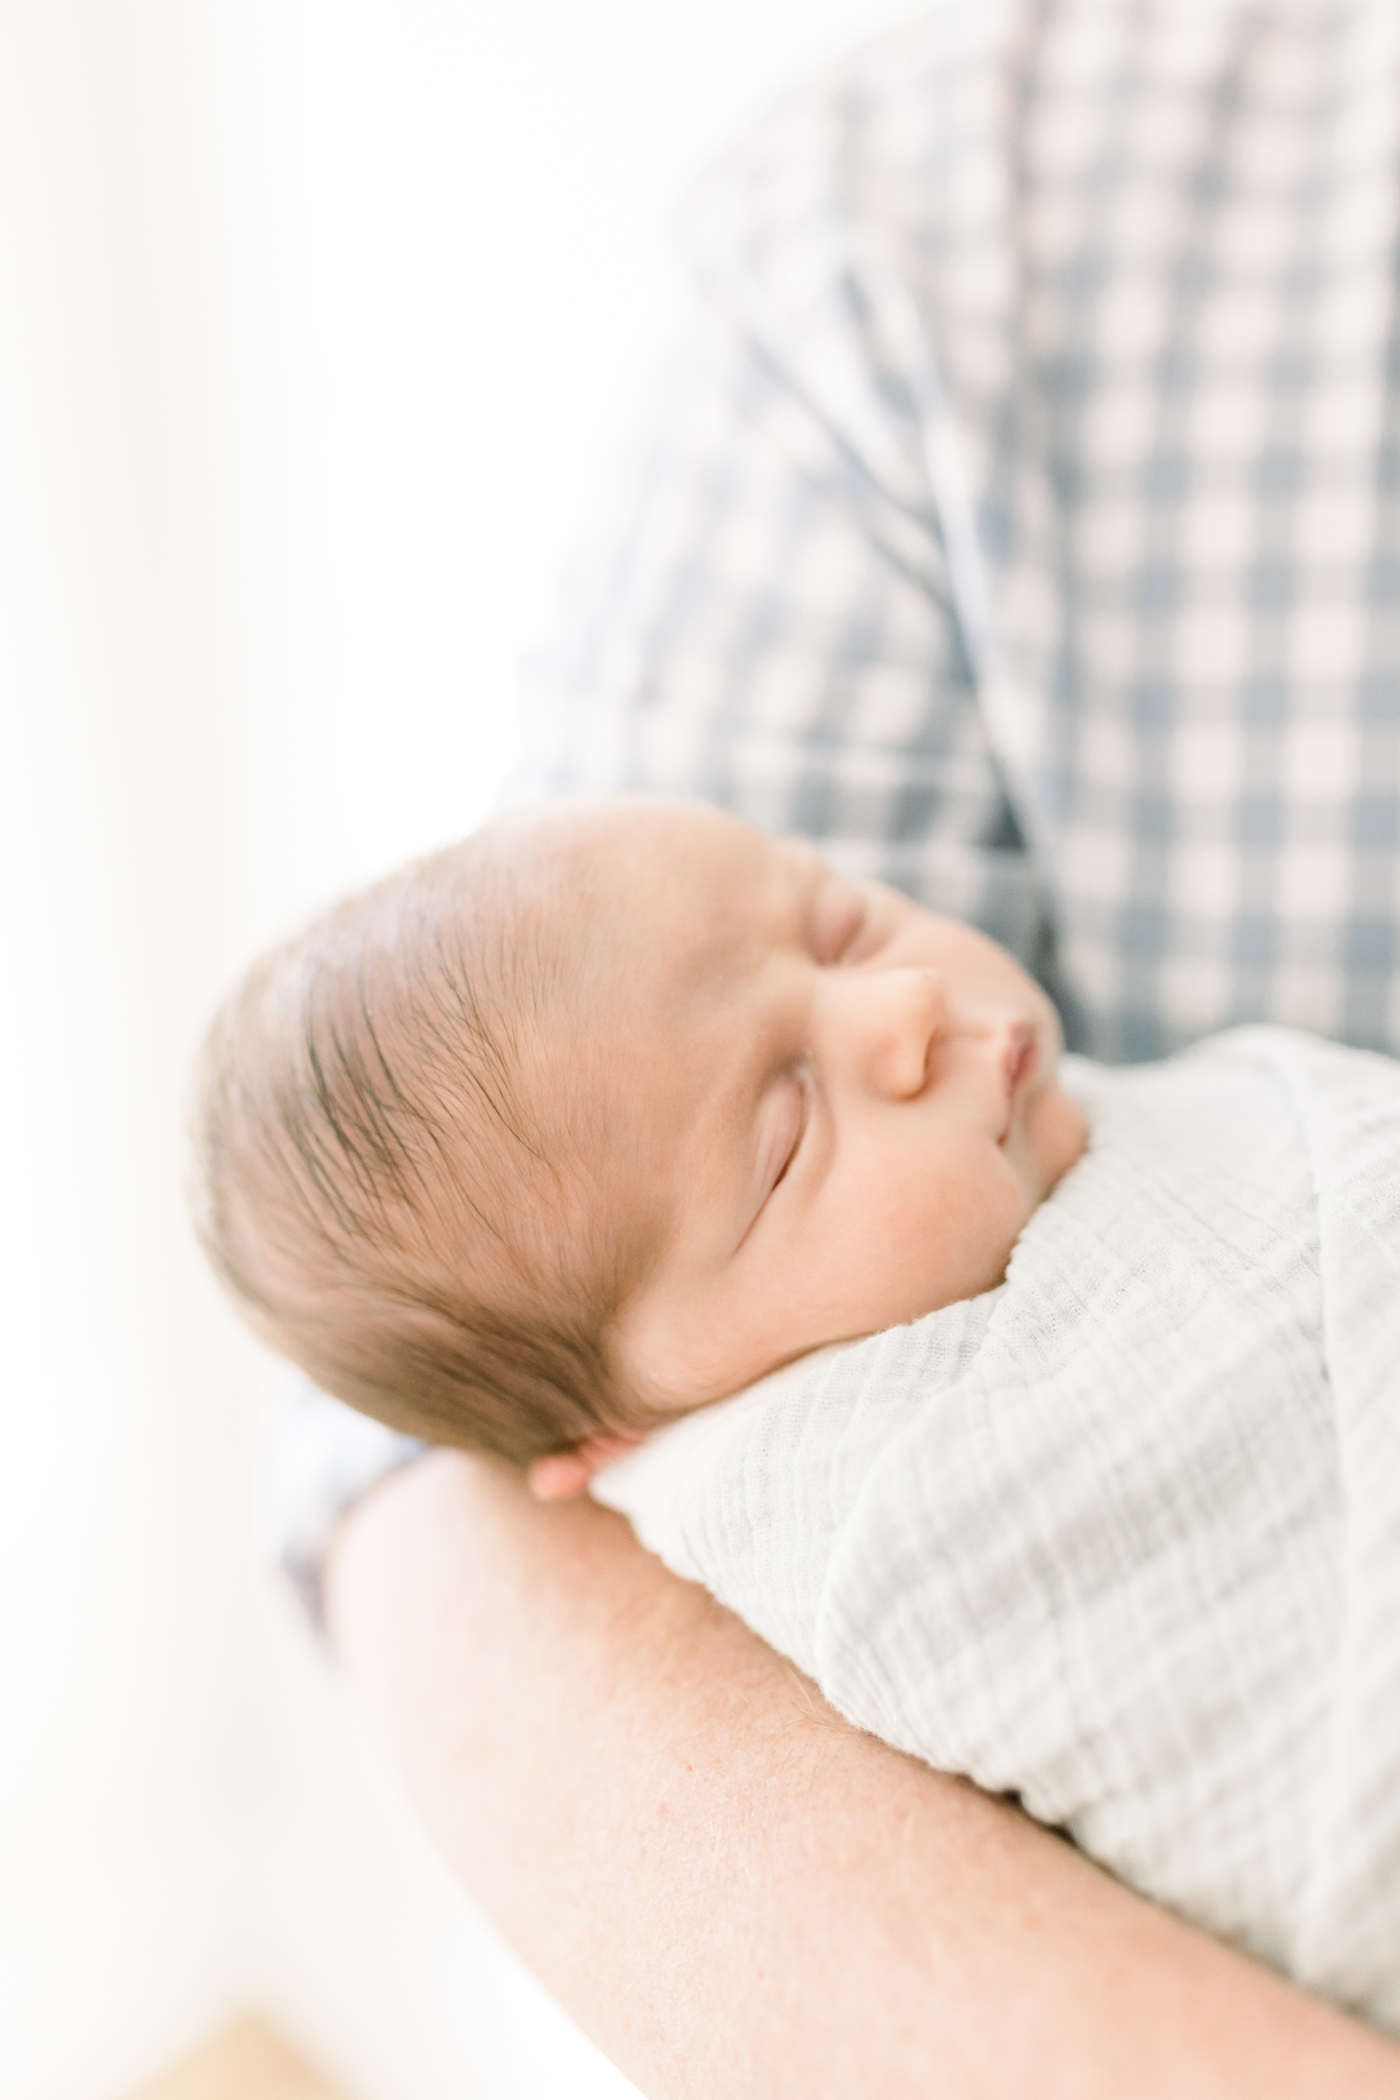 Detail of sleeping newborn during an in home session | Photo by Caitlyn Motycka Photography.